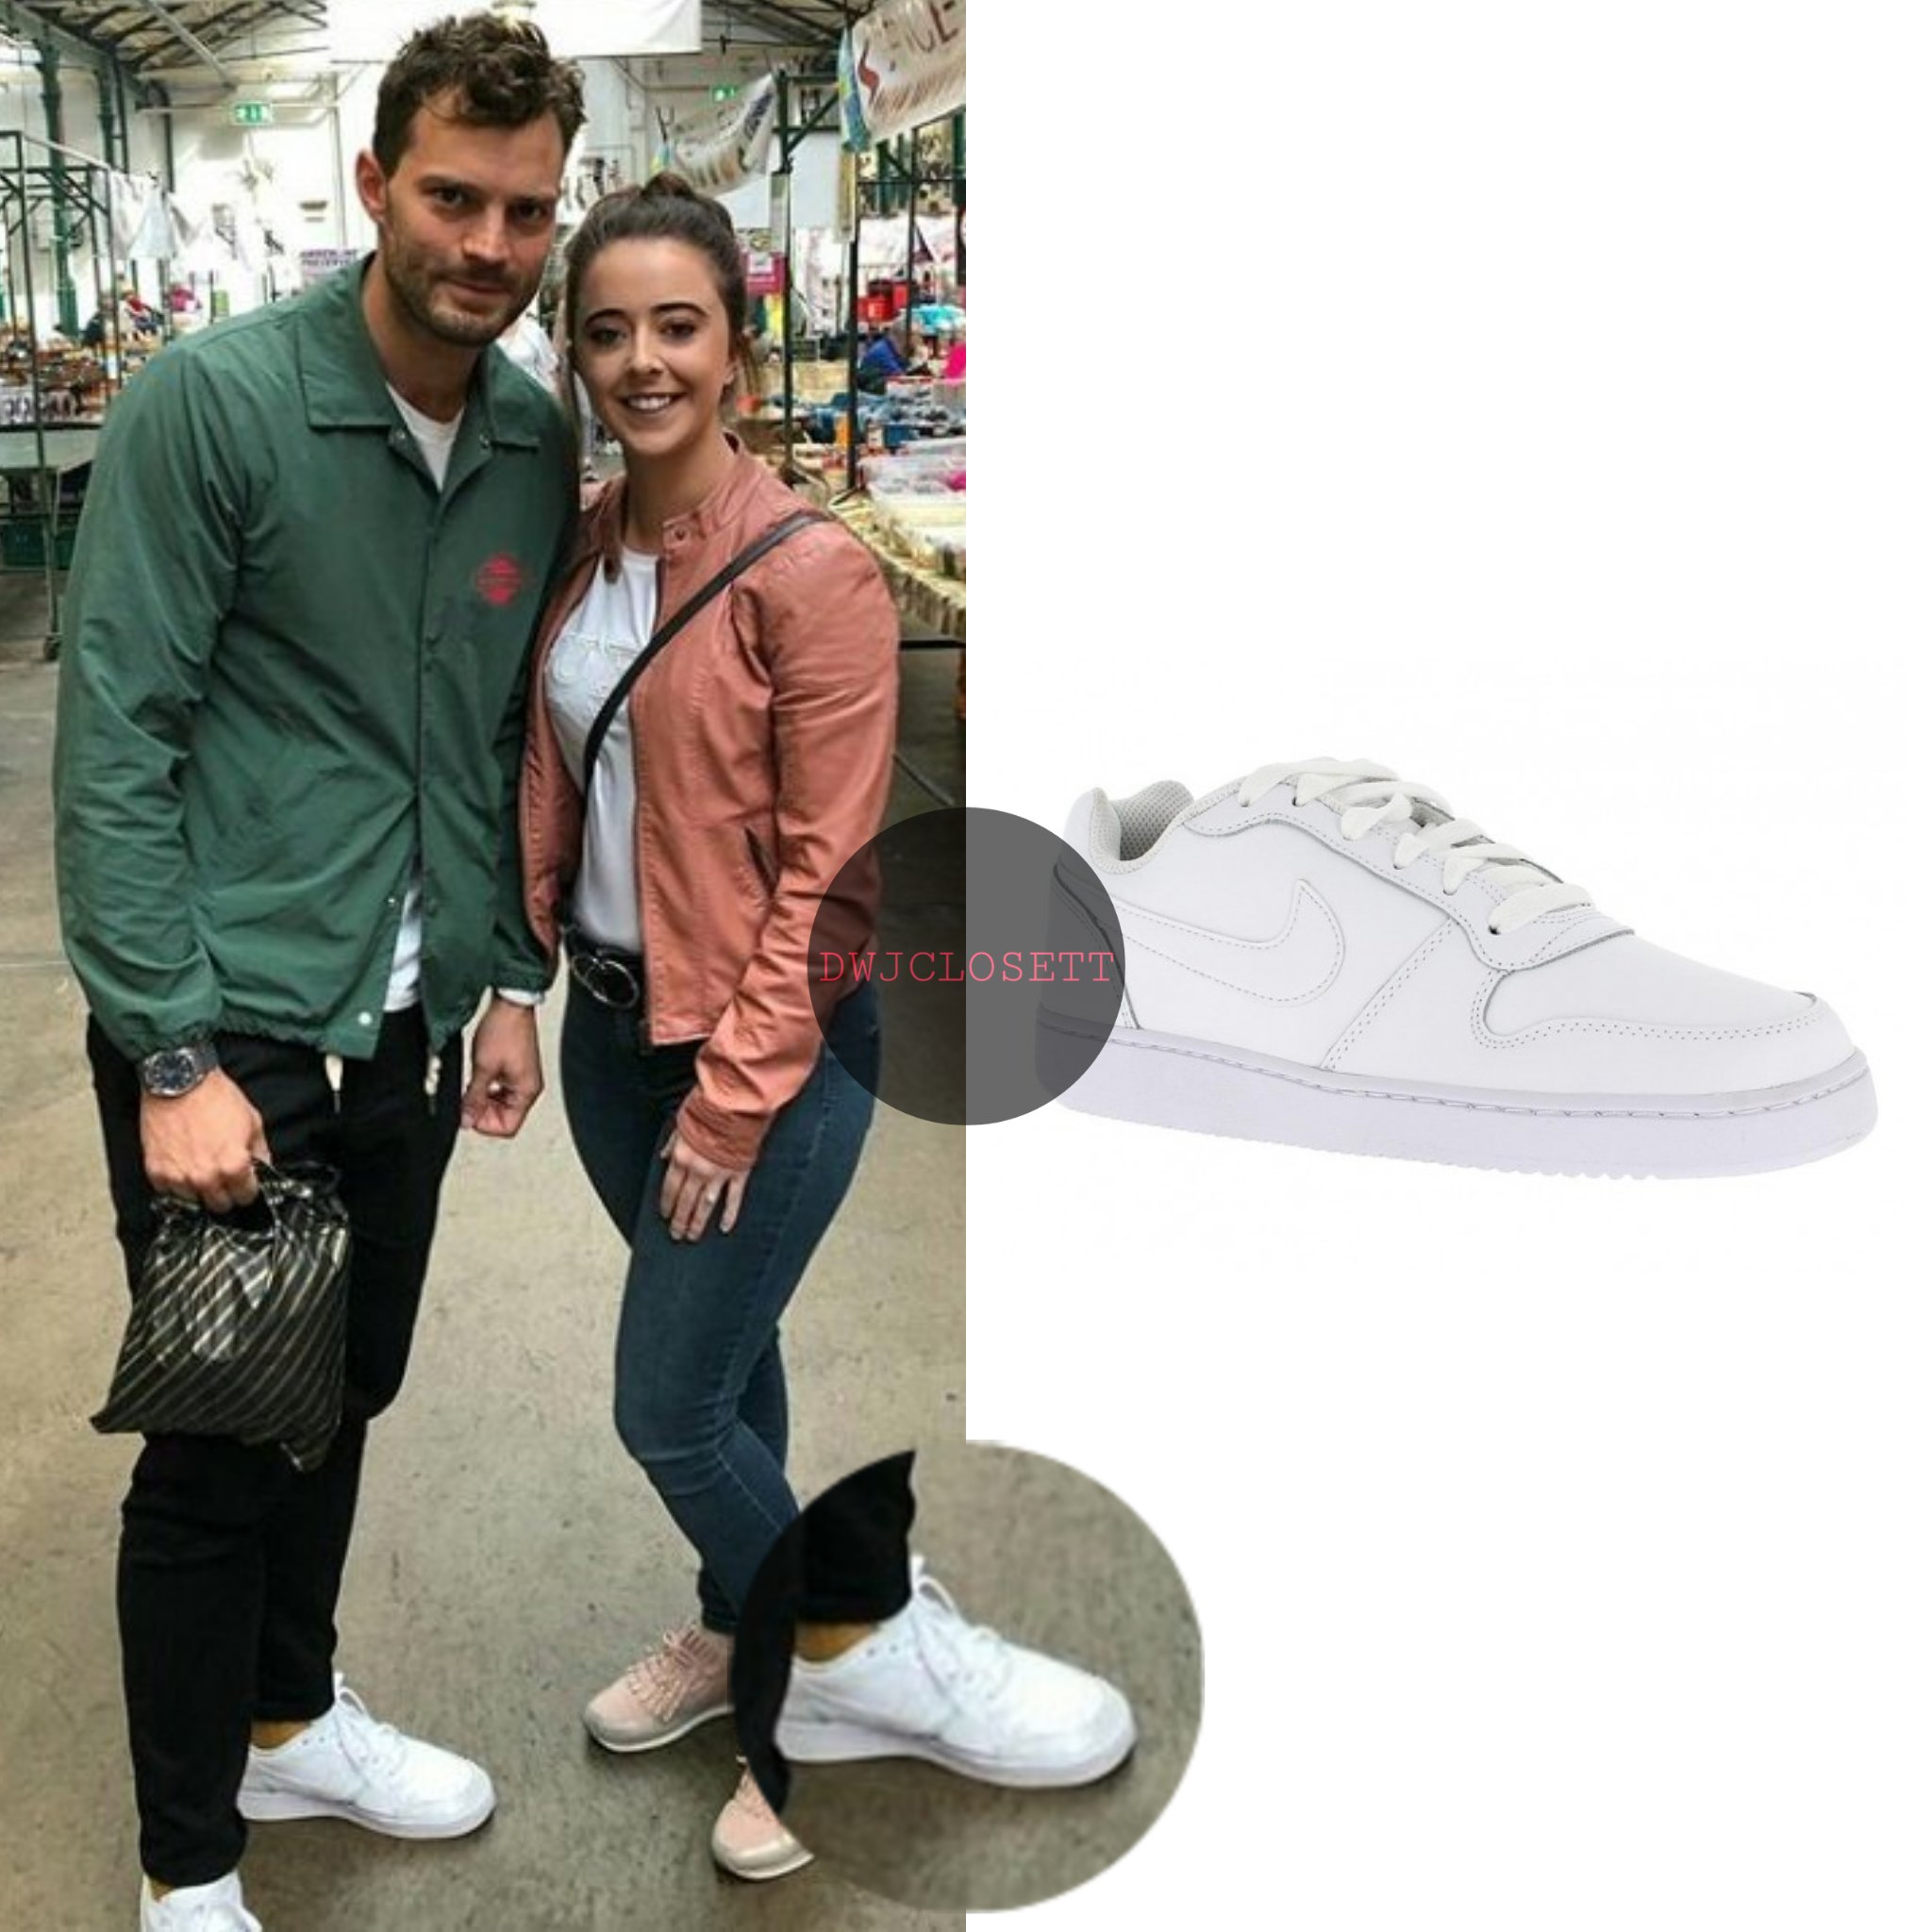 The Dornans Closet ❤️ on Twitter: "[NEW] today in St George's Market, Belfast. - Wearing the @nike Ebernon Low in White ($65), @kitsune Plain Bertil (sold out) and @omega